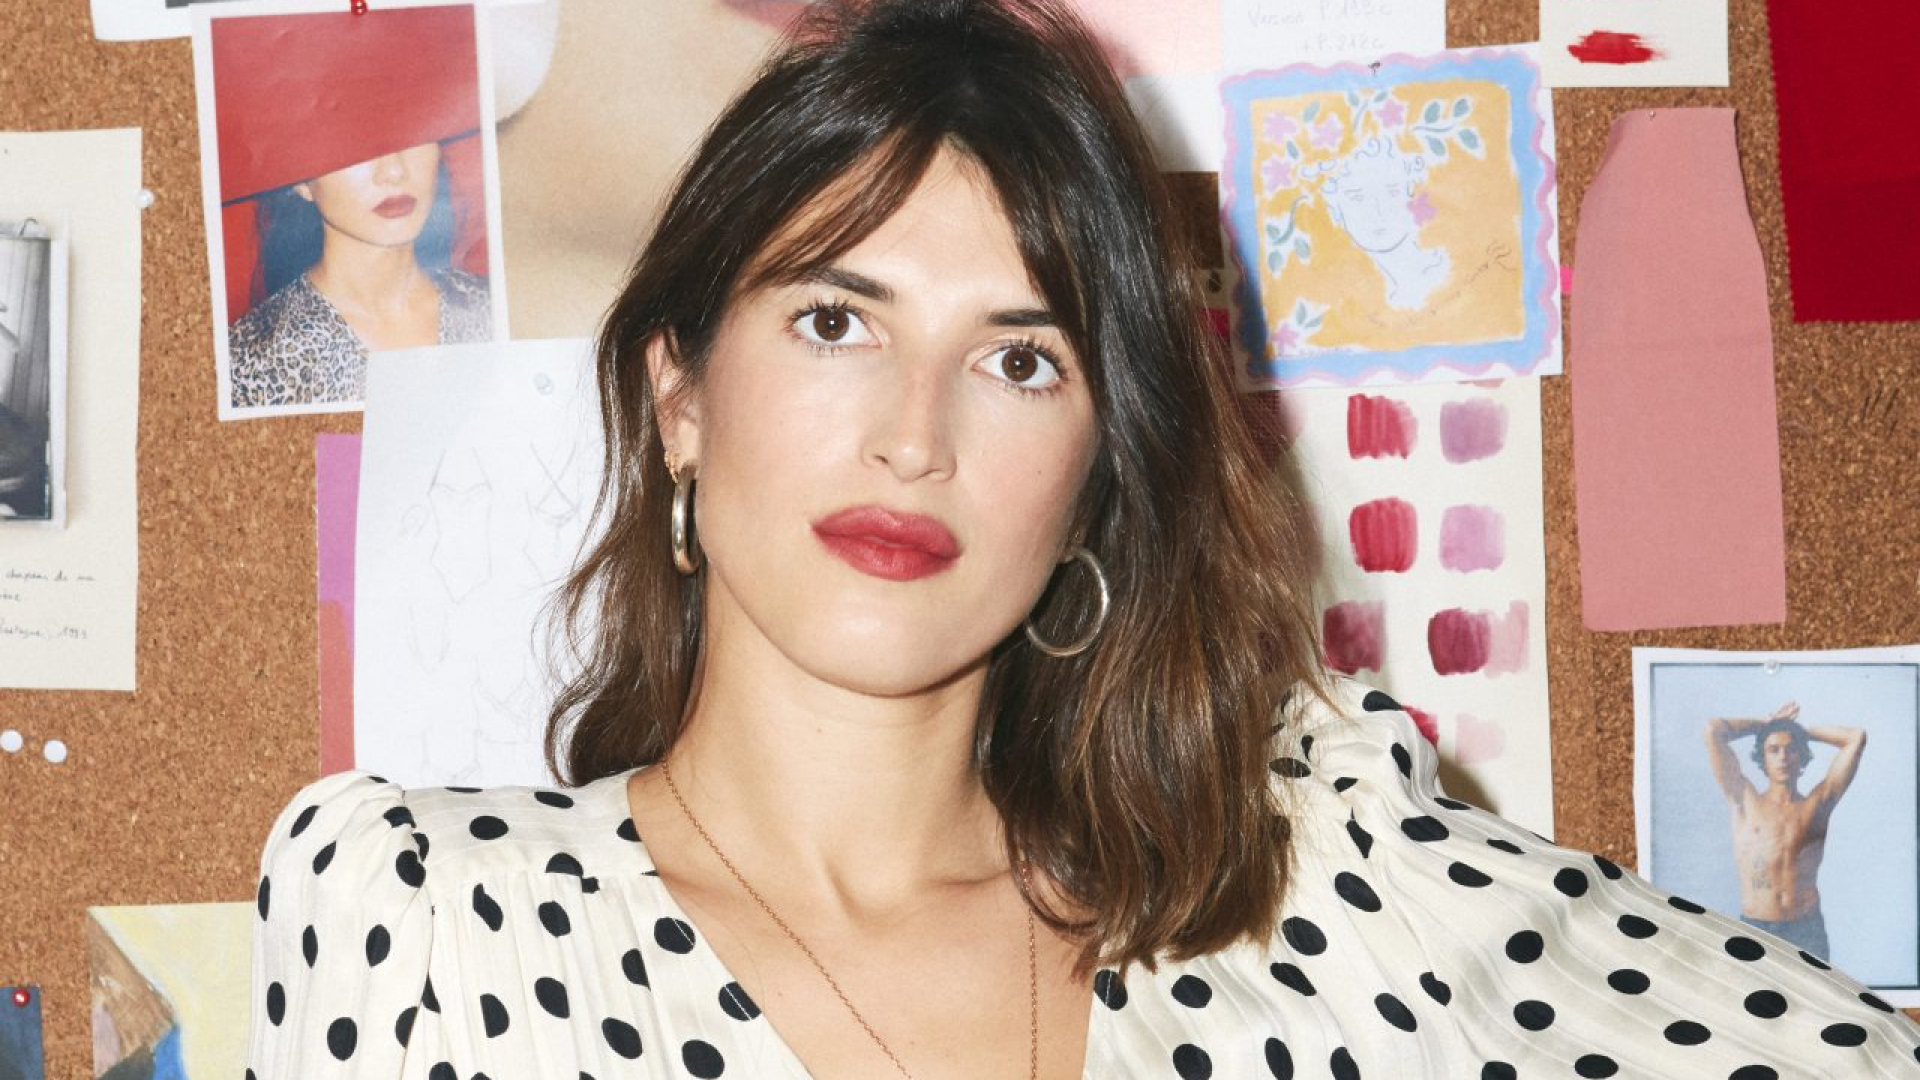 Rouje Founder Jeanne Damas Shares Her Lessons In Parisian Style